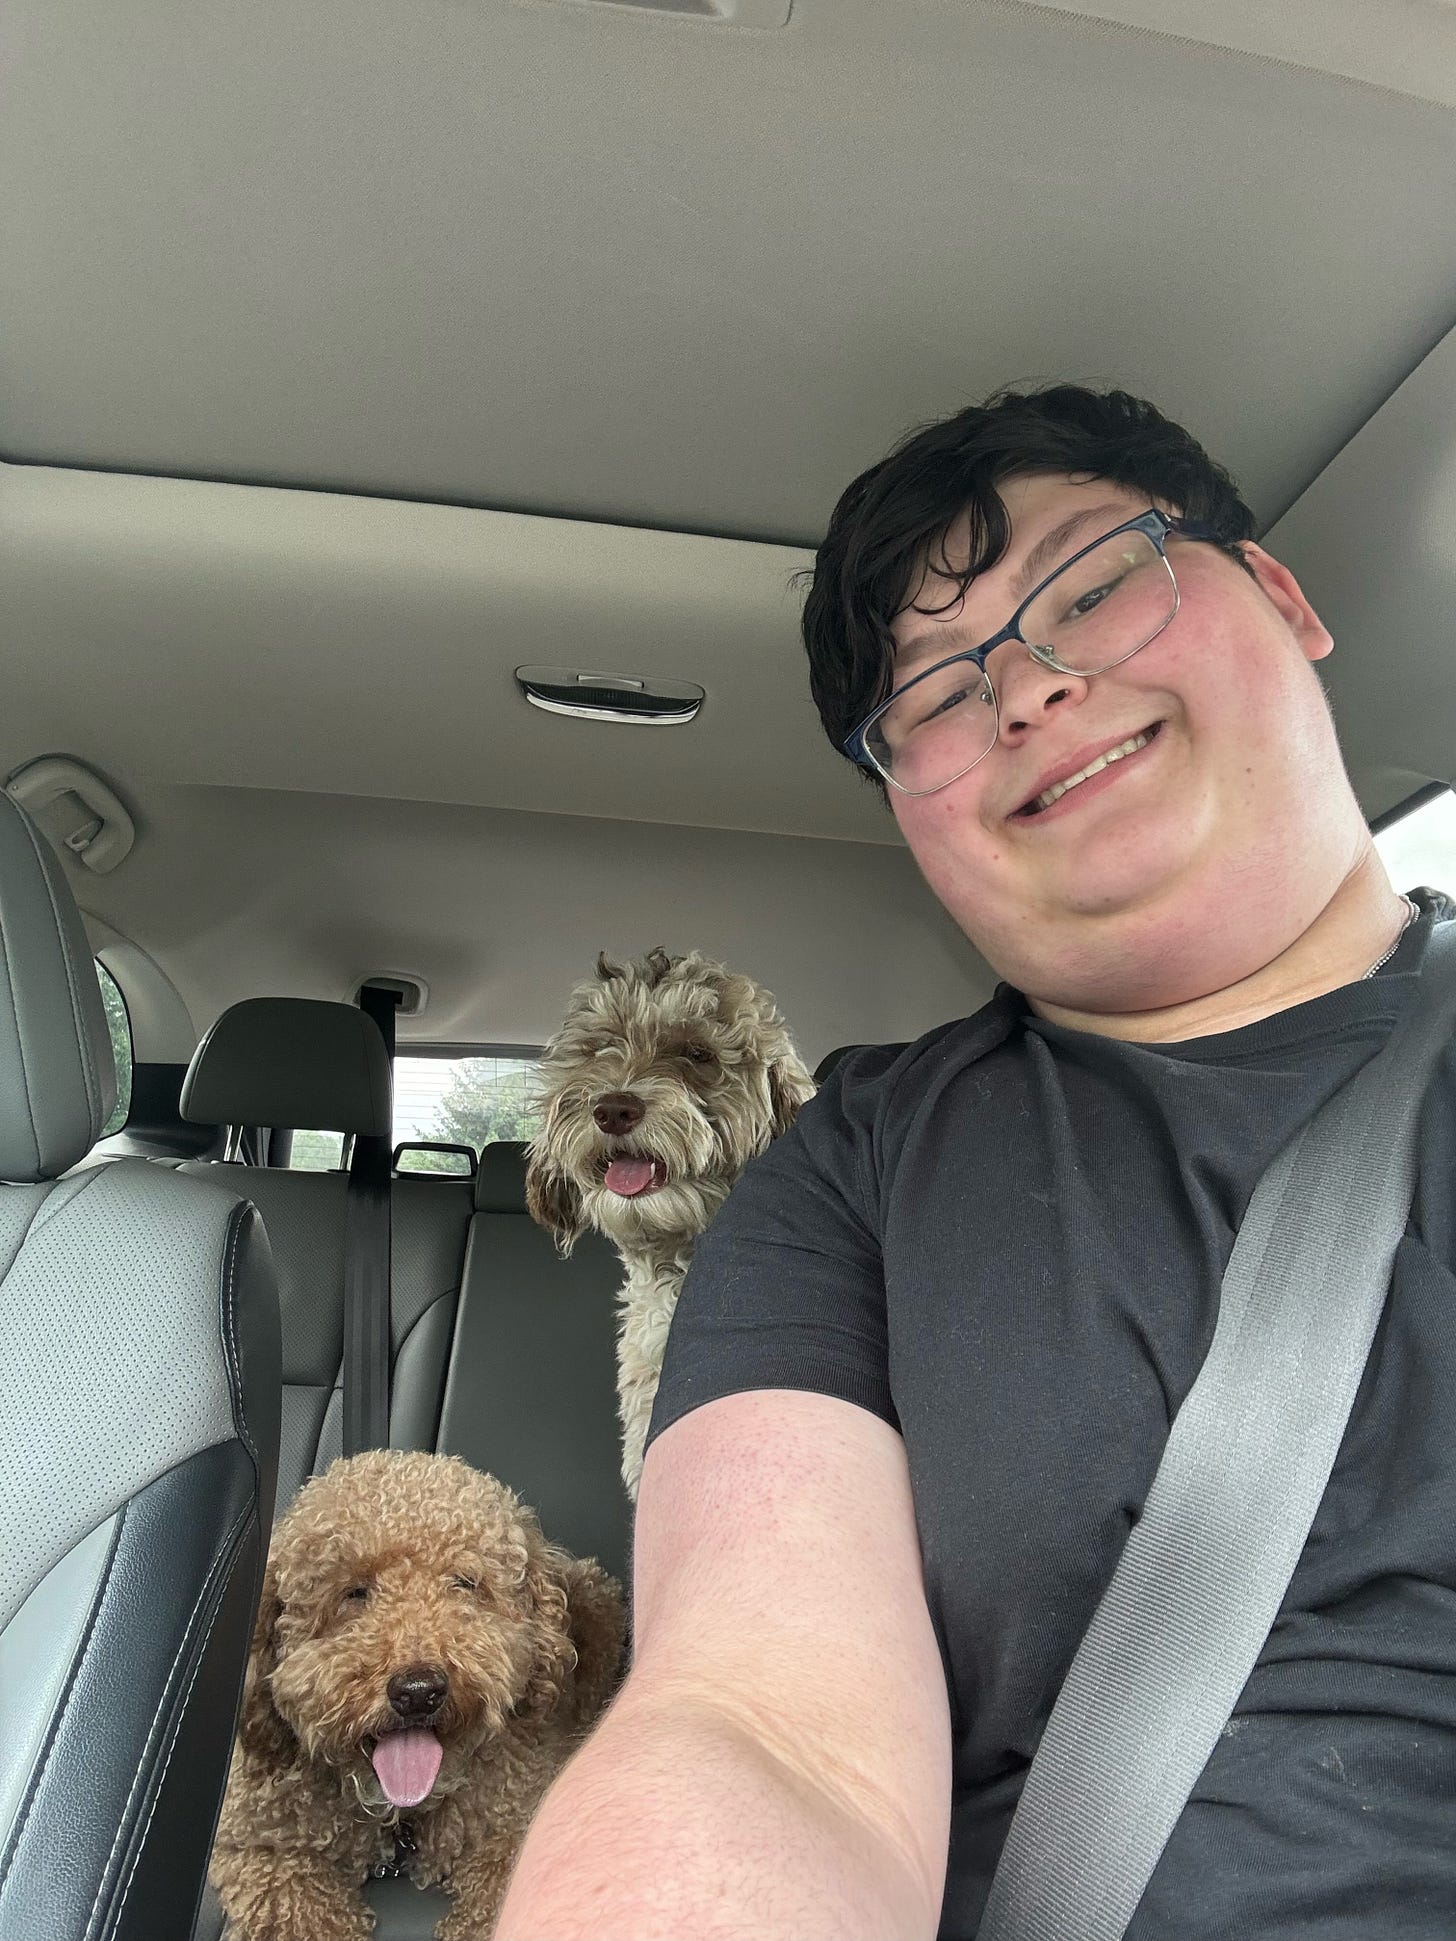 Rafi is a teenage boy weraing glasses, he has short brown hair and wears a greay tshirt. he sits behind the driver's wheel in a c ar. Two small dogs sit in the car with him